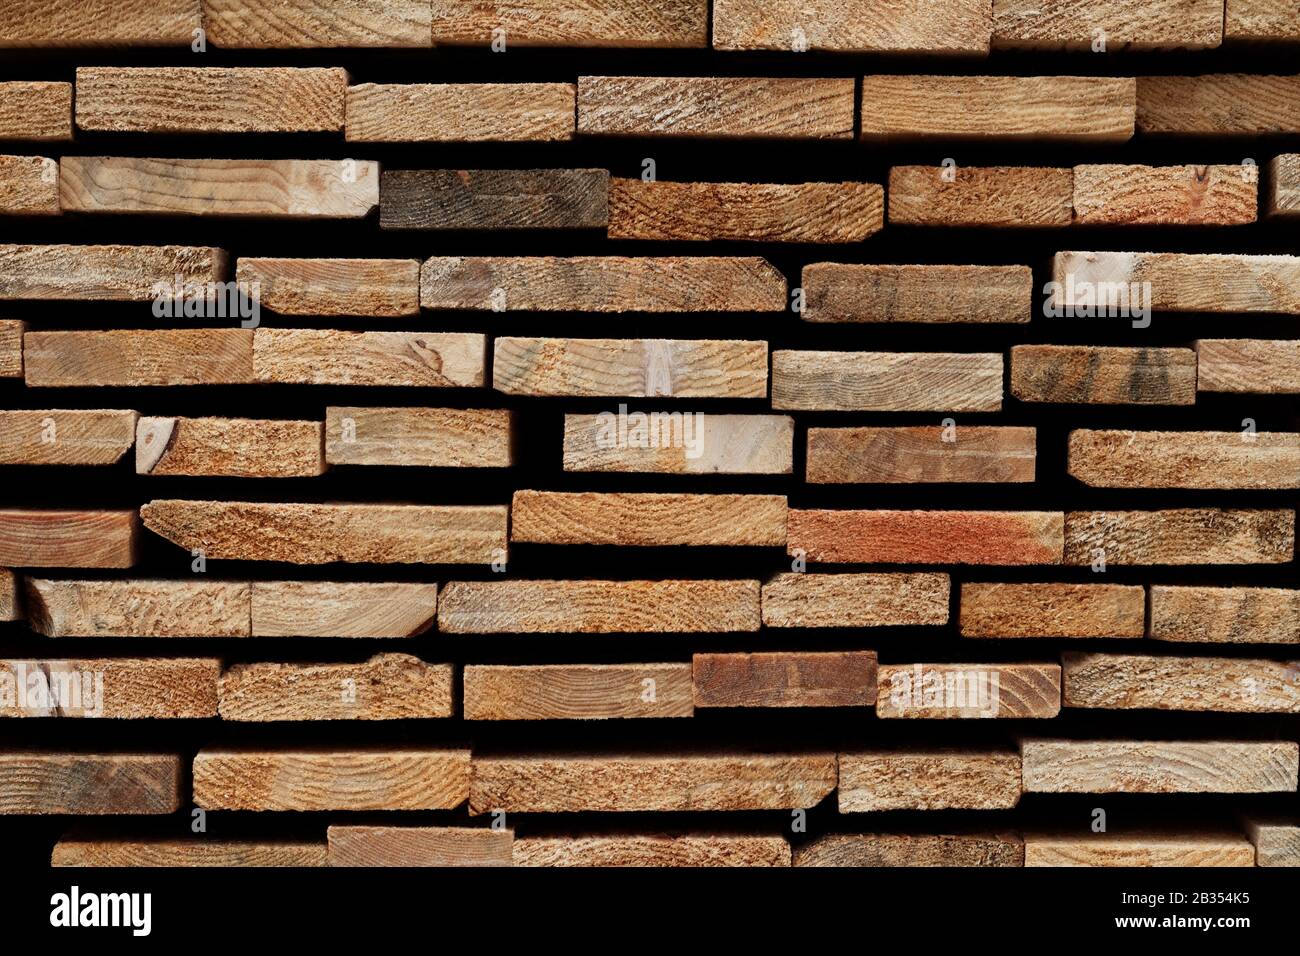 Abstract Wooden Background: Stacked Cross-Sections of Different Softwood Slats Stock Photo